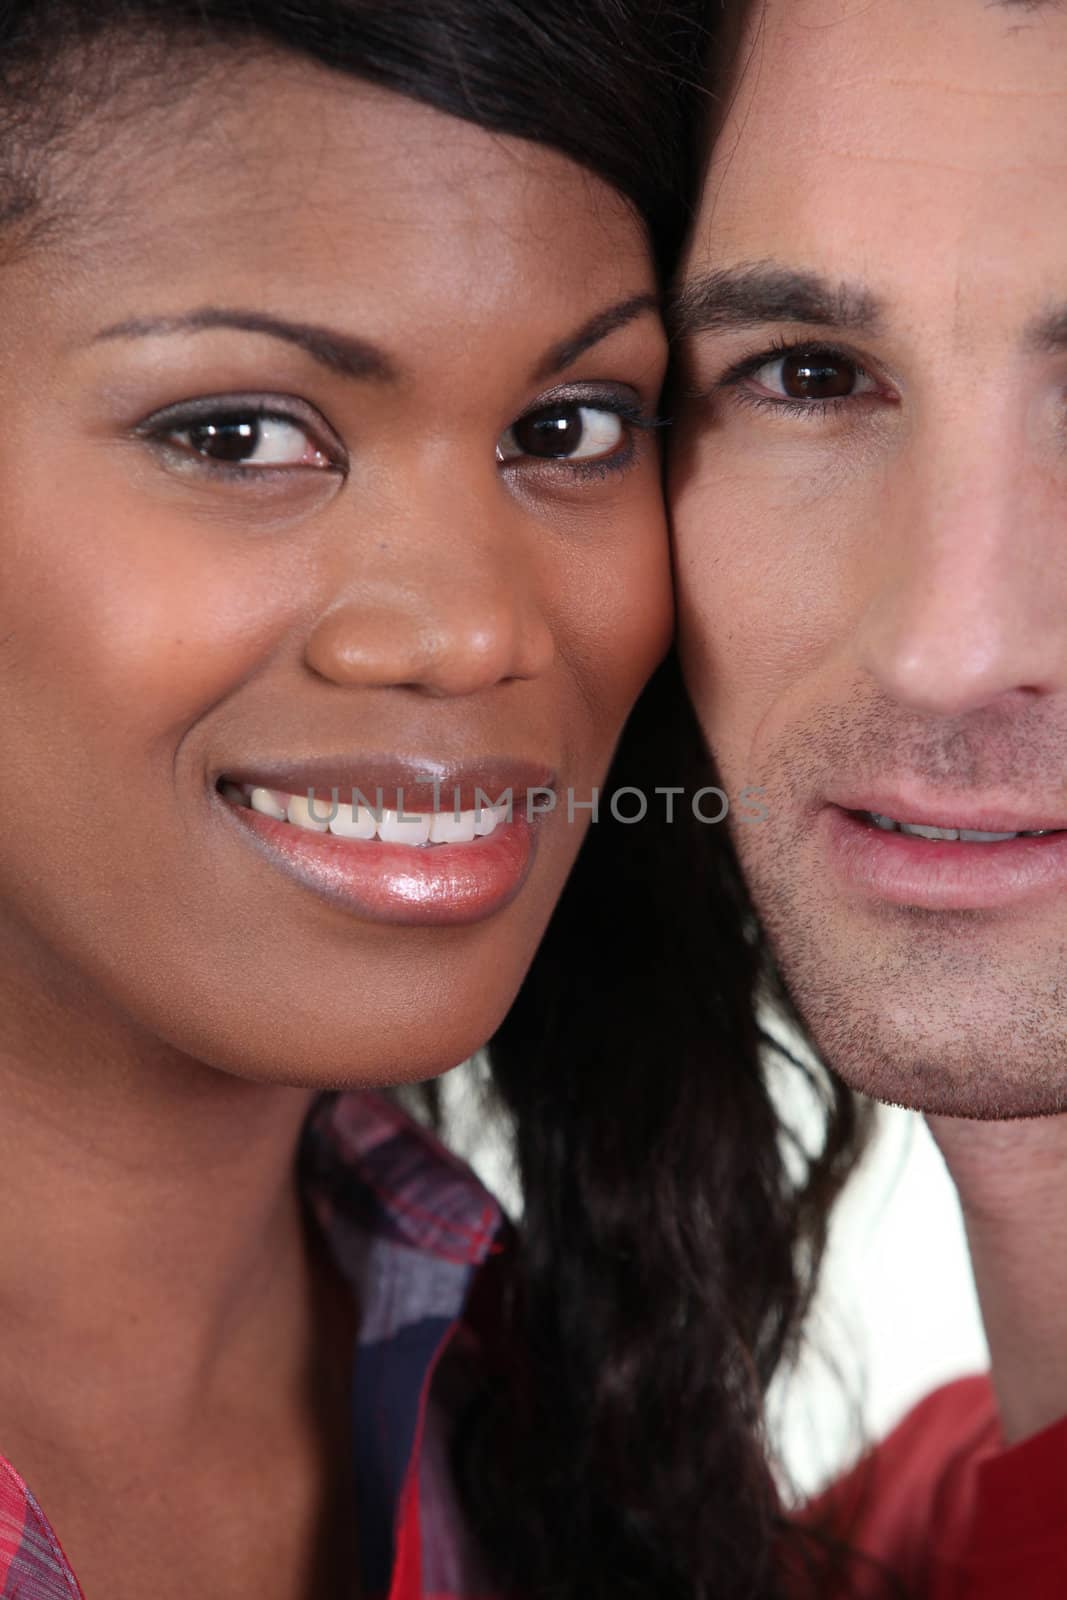 Closeup on the faces of a young couple